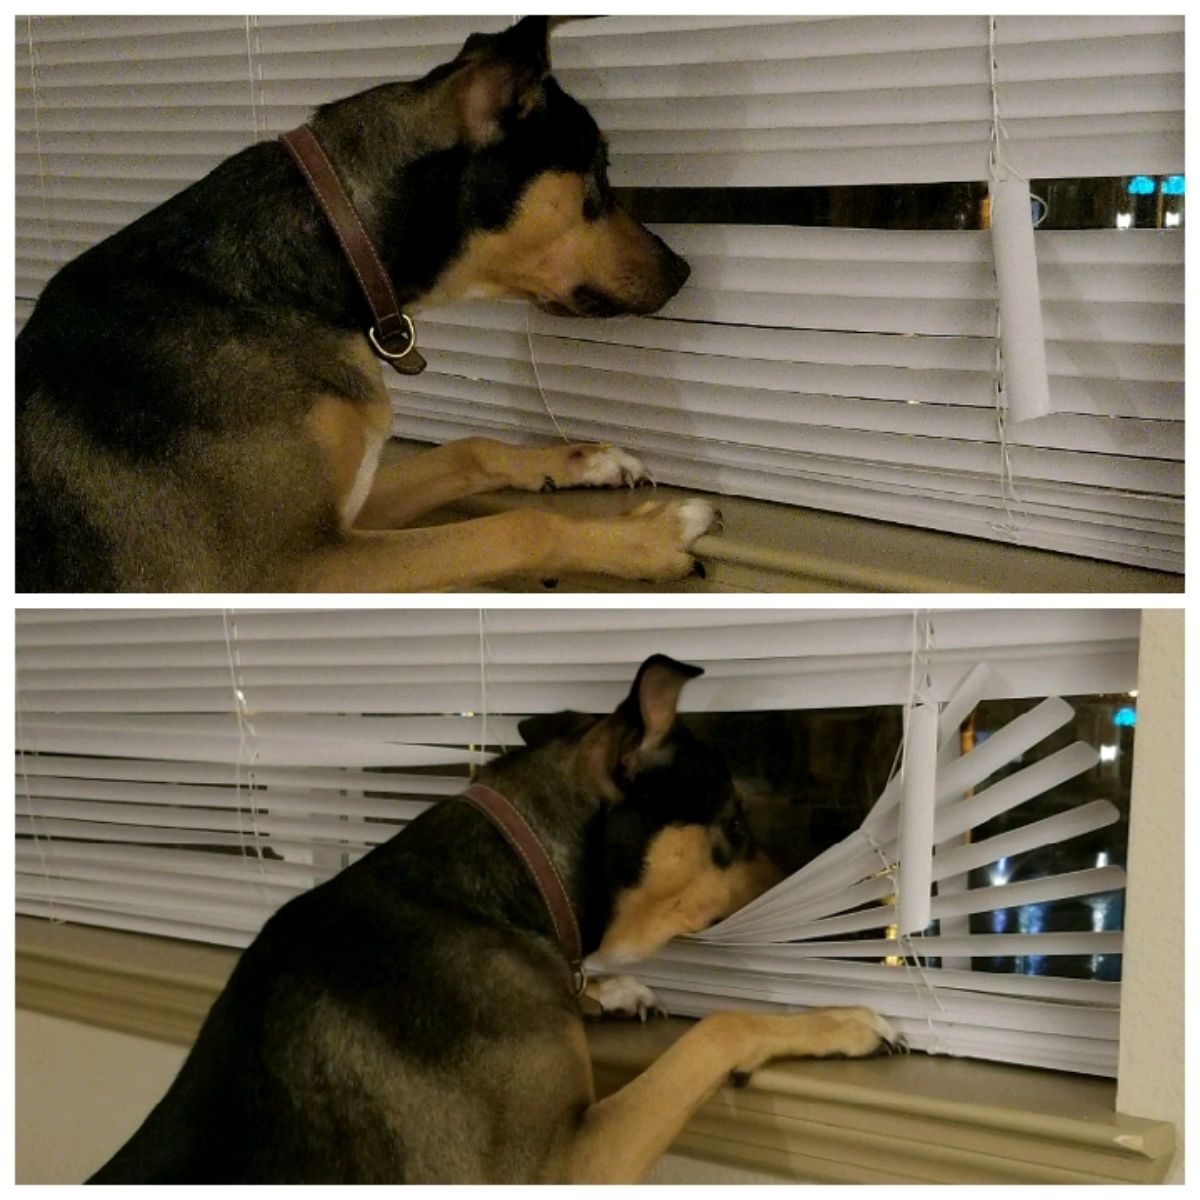 1 photo of a black and brown dog peeking through a gap in the blinds at a window and 1 photo of the dog parting the blinds to look out